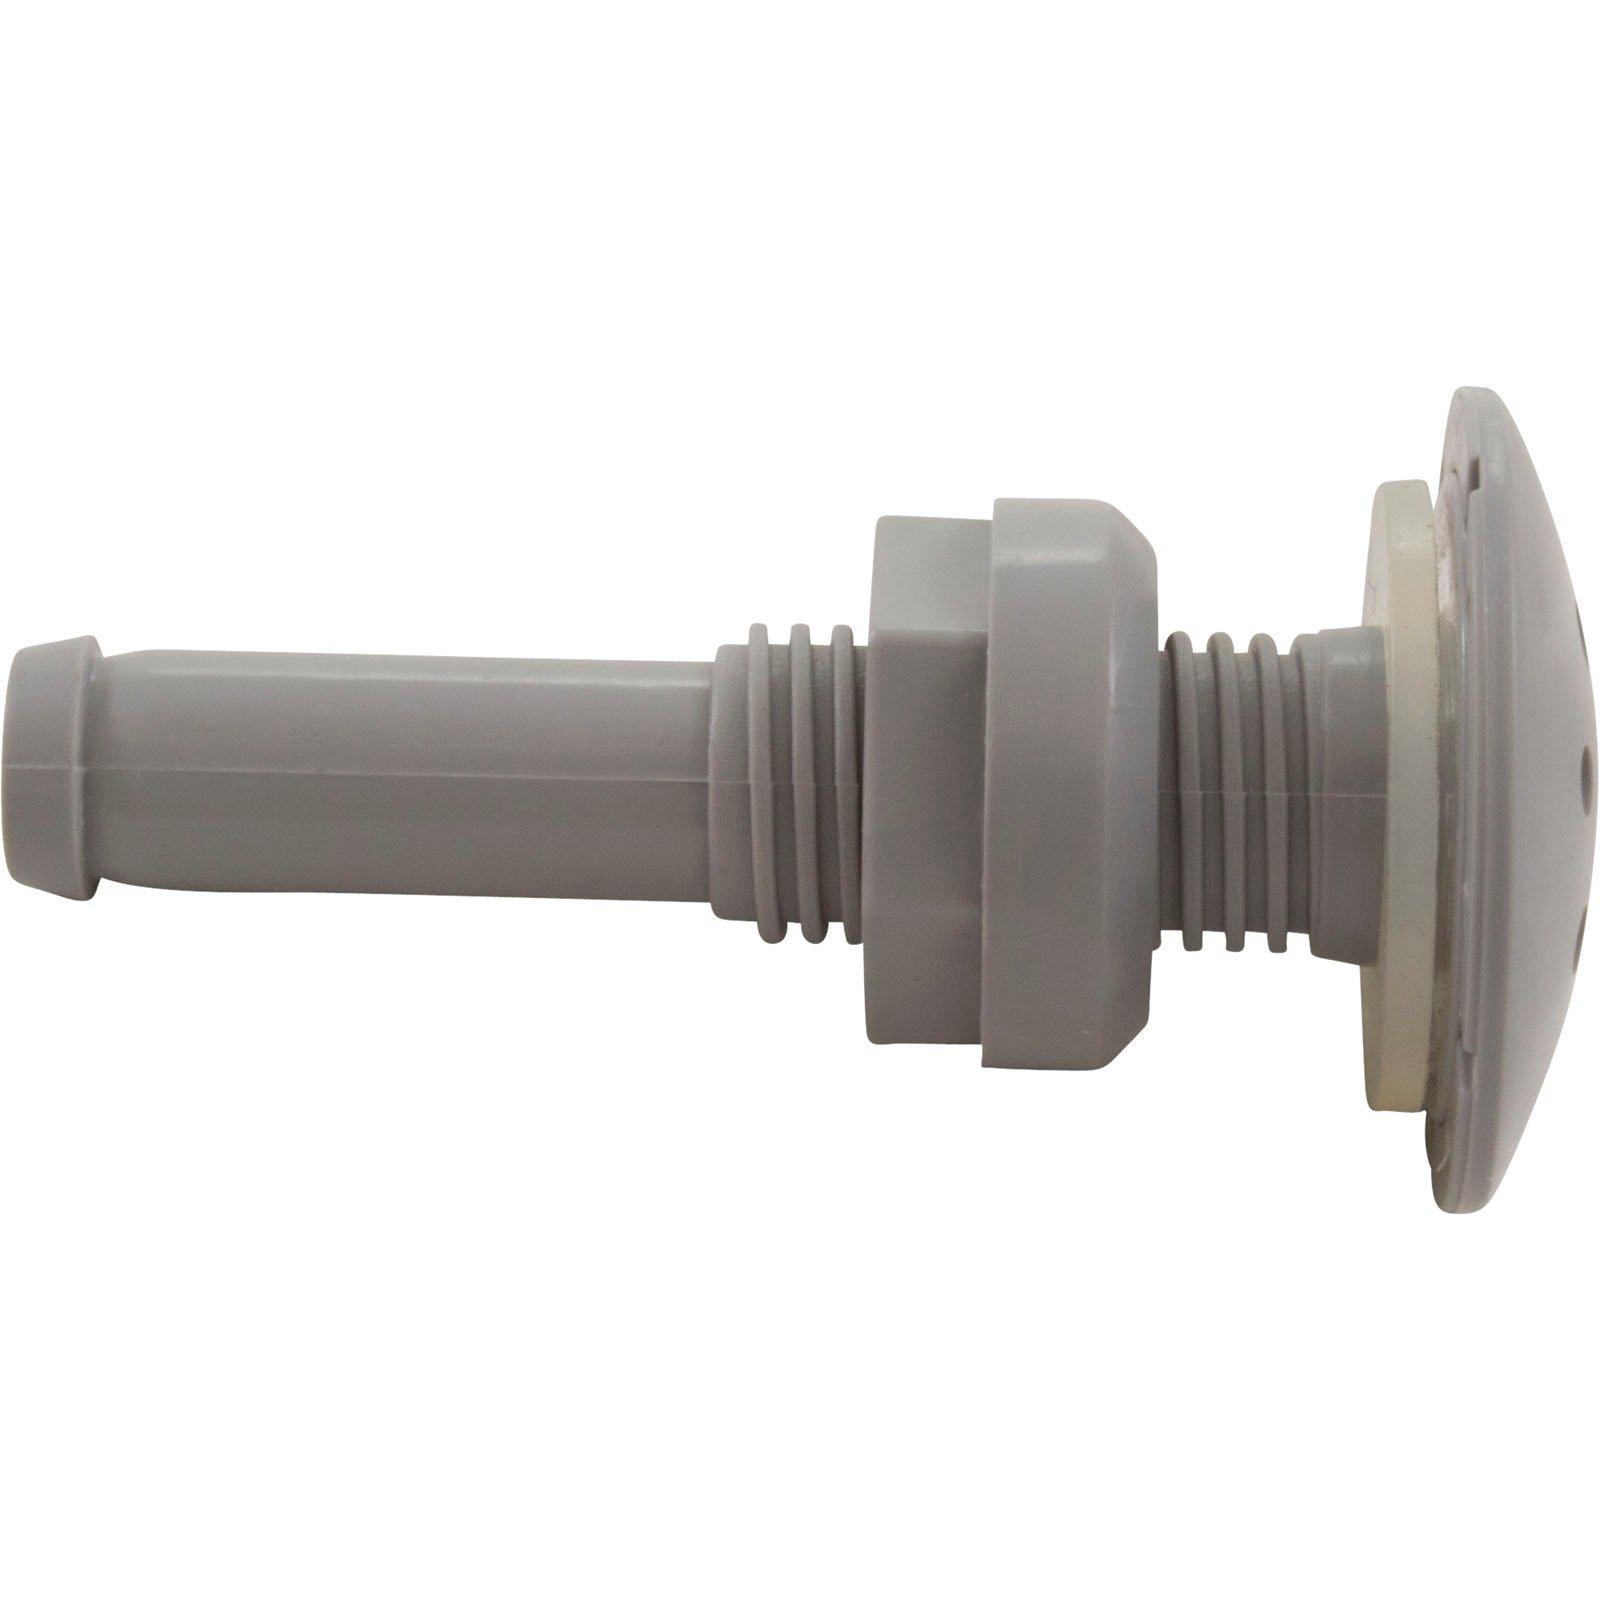 CMP Air Injector CMP Economy 3/8 Barbed Gray